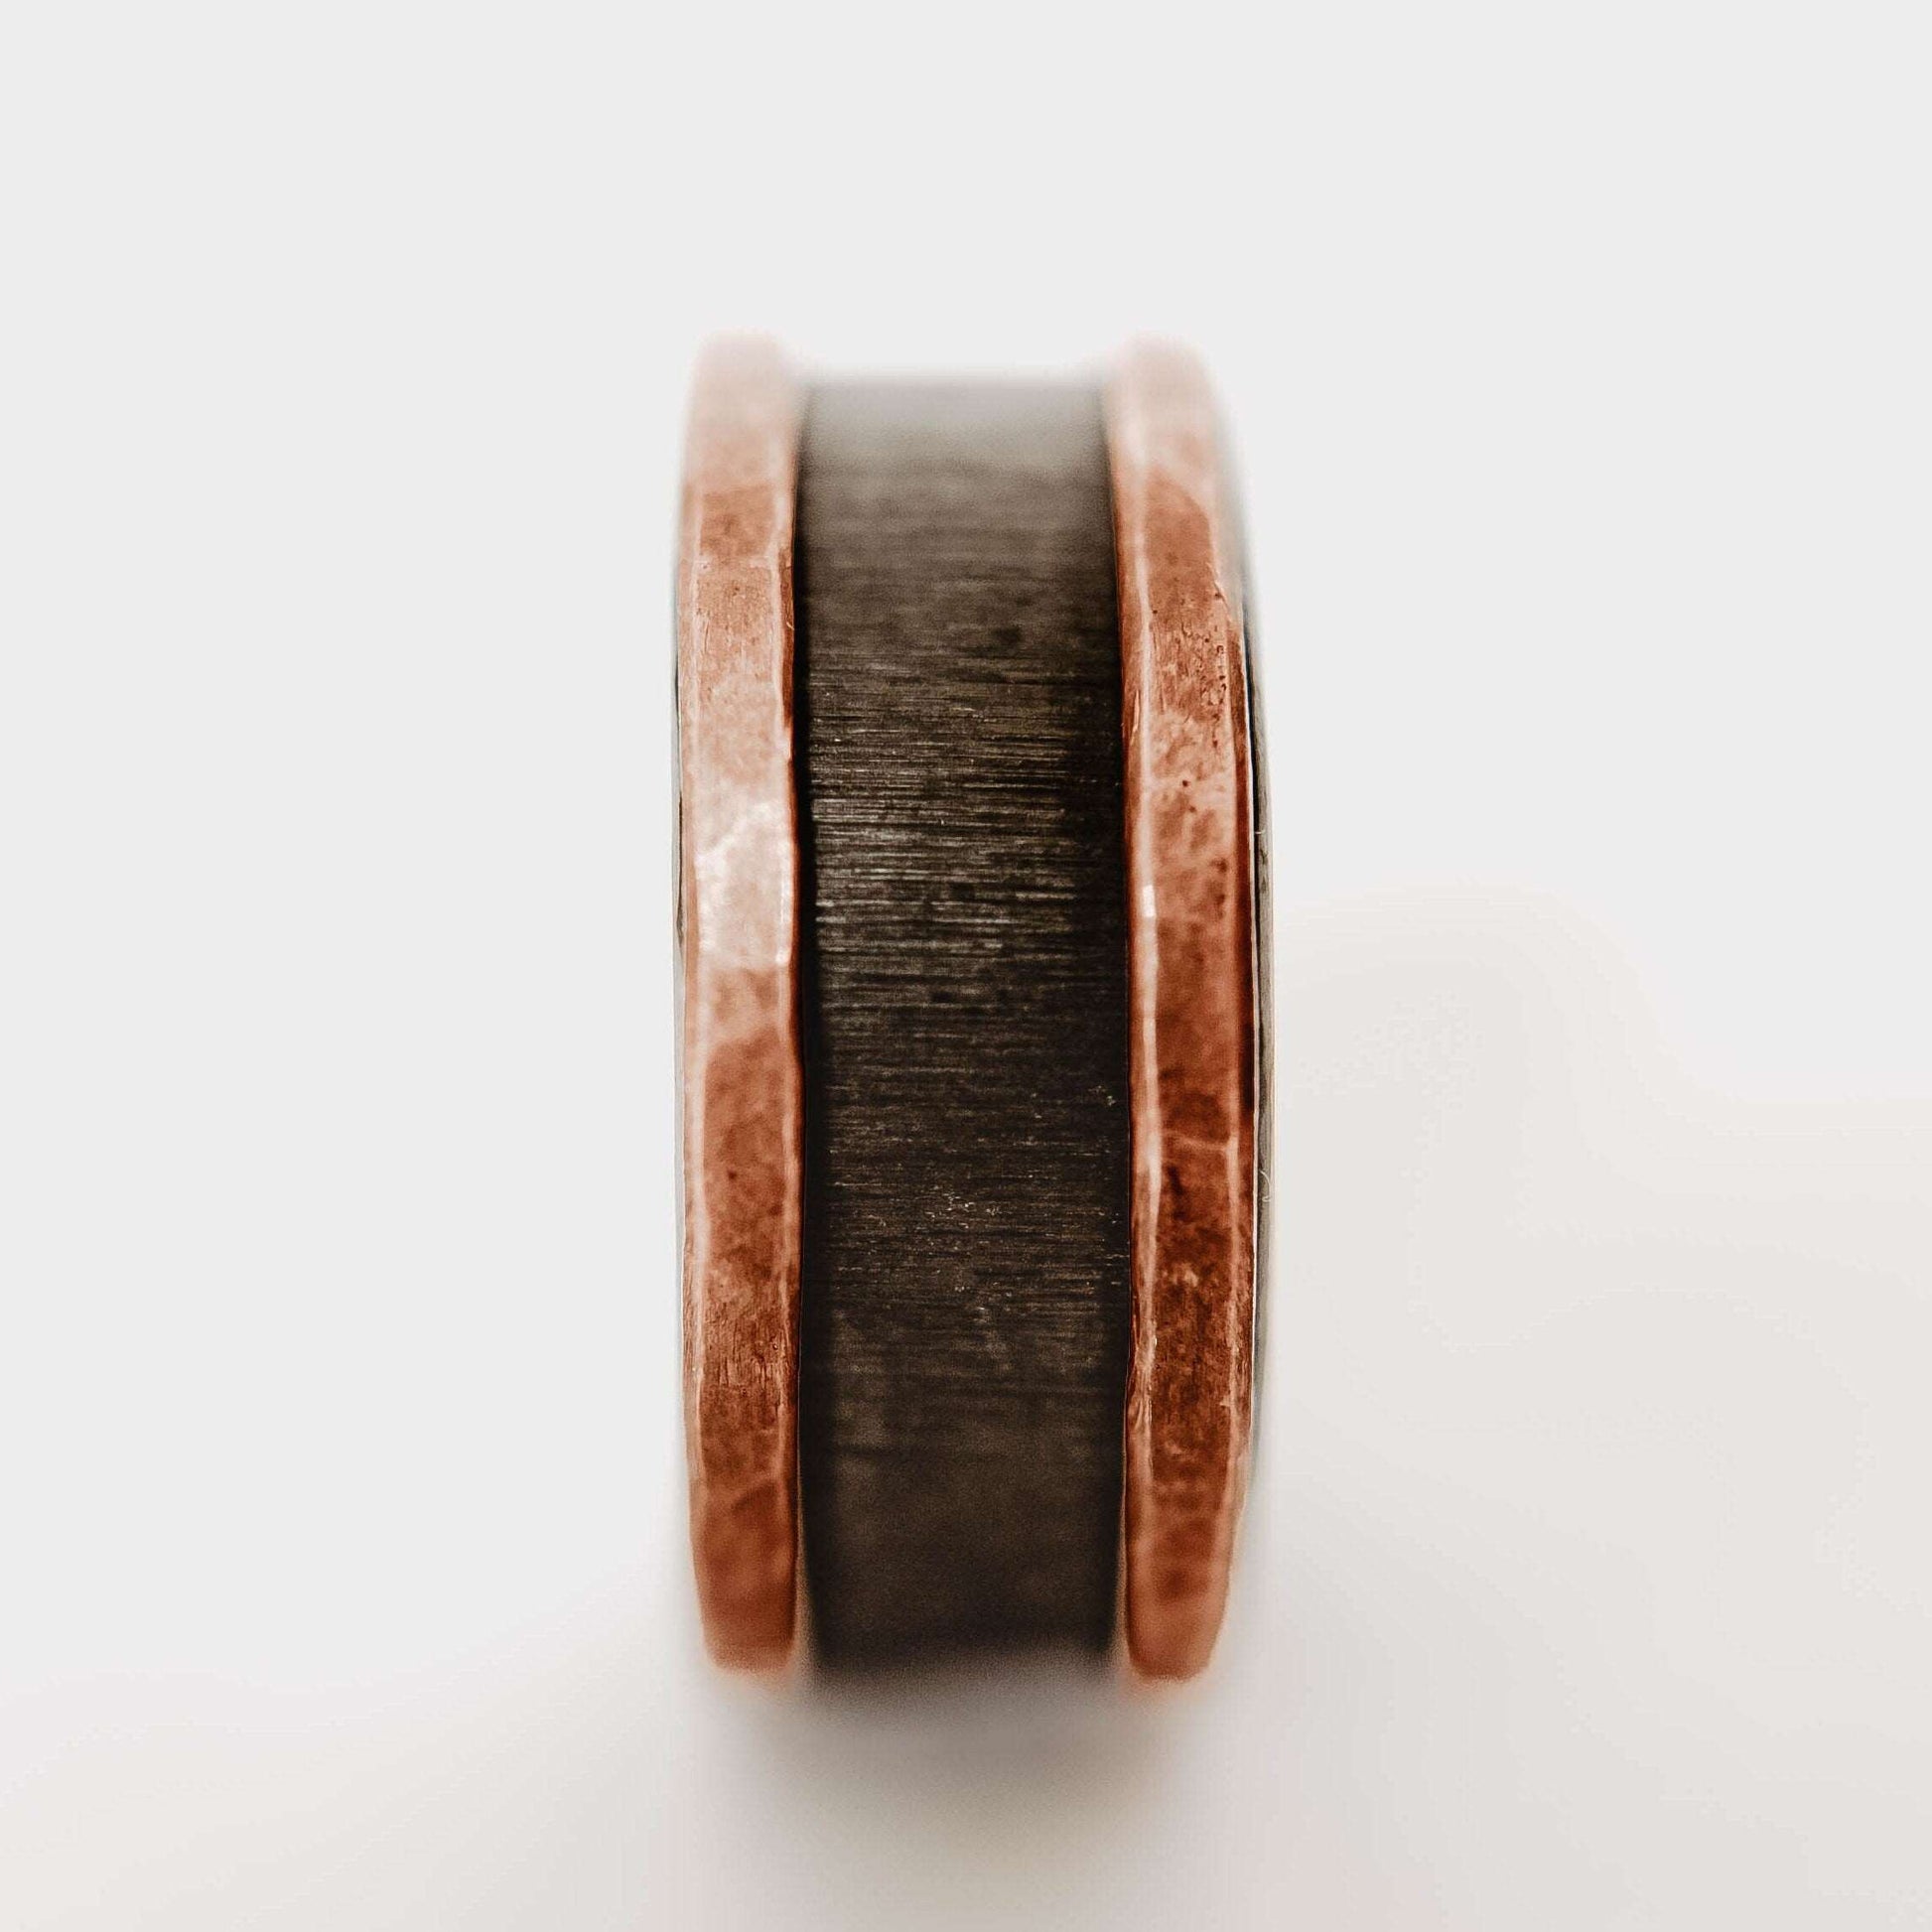 Mens zirconium and copper wedding band. This photo shows a vertical grit zirconium band with a copper band on each edge. (Vertical with white background)